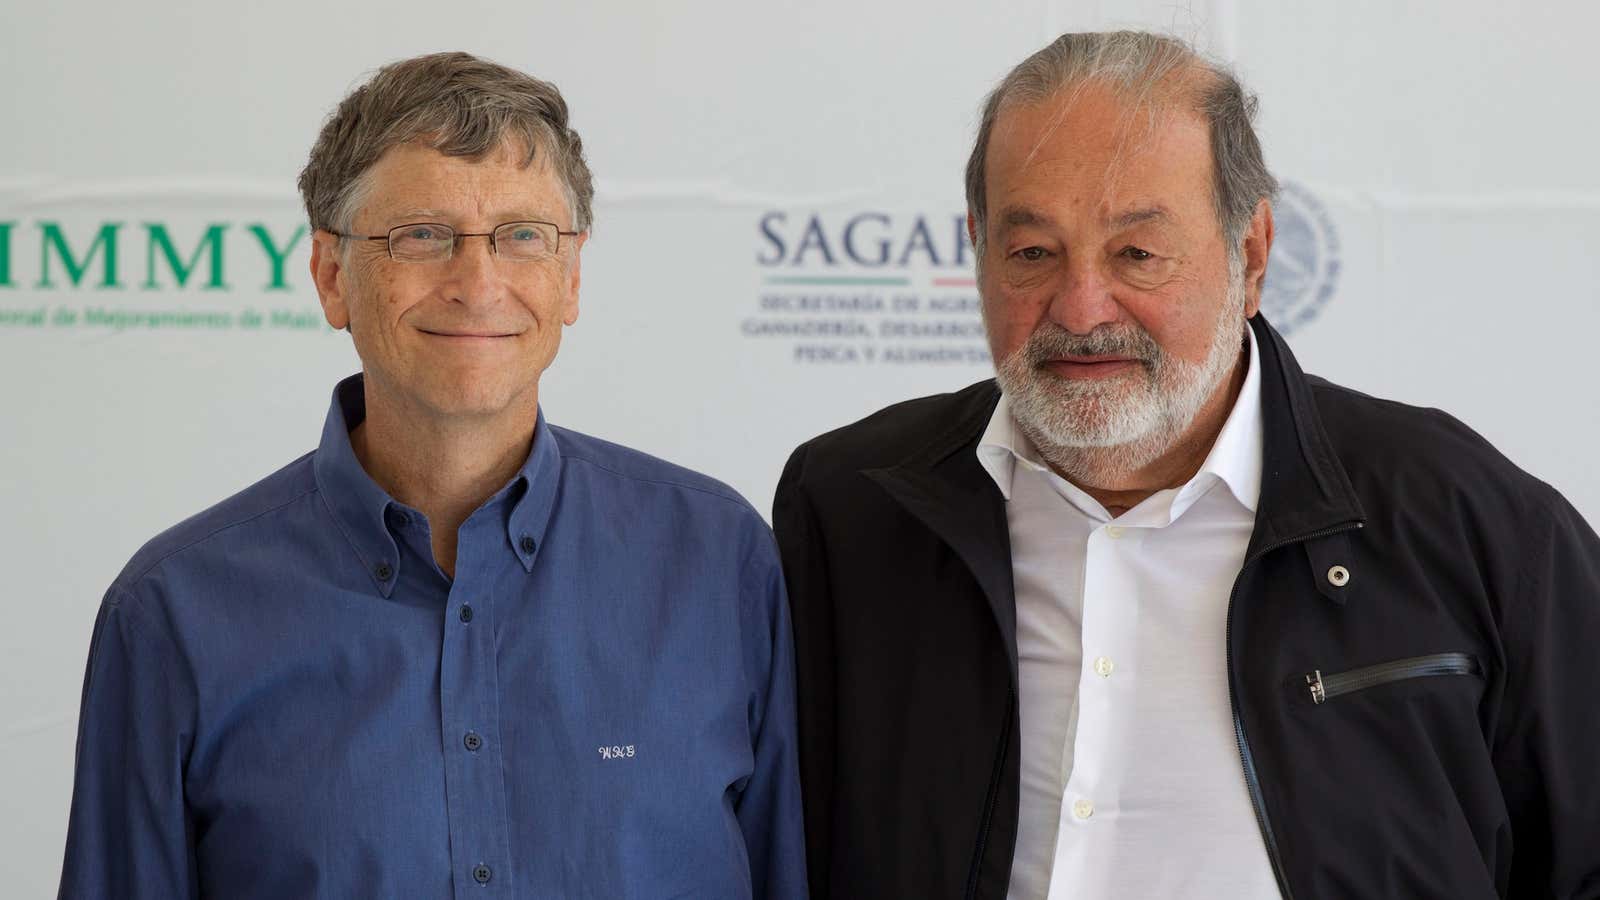 The world’s two richest men. Carols Slim, on the right, is still number one, though he just lost $4 billion.